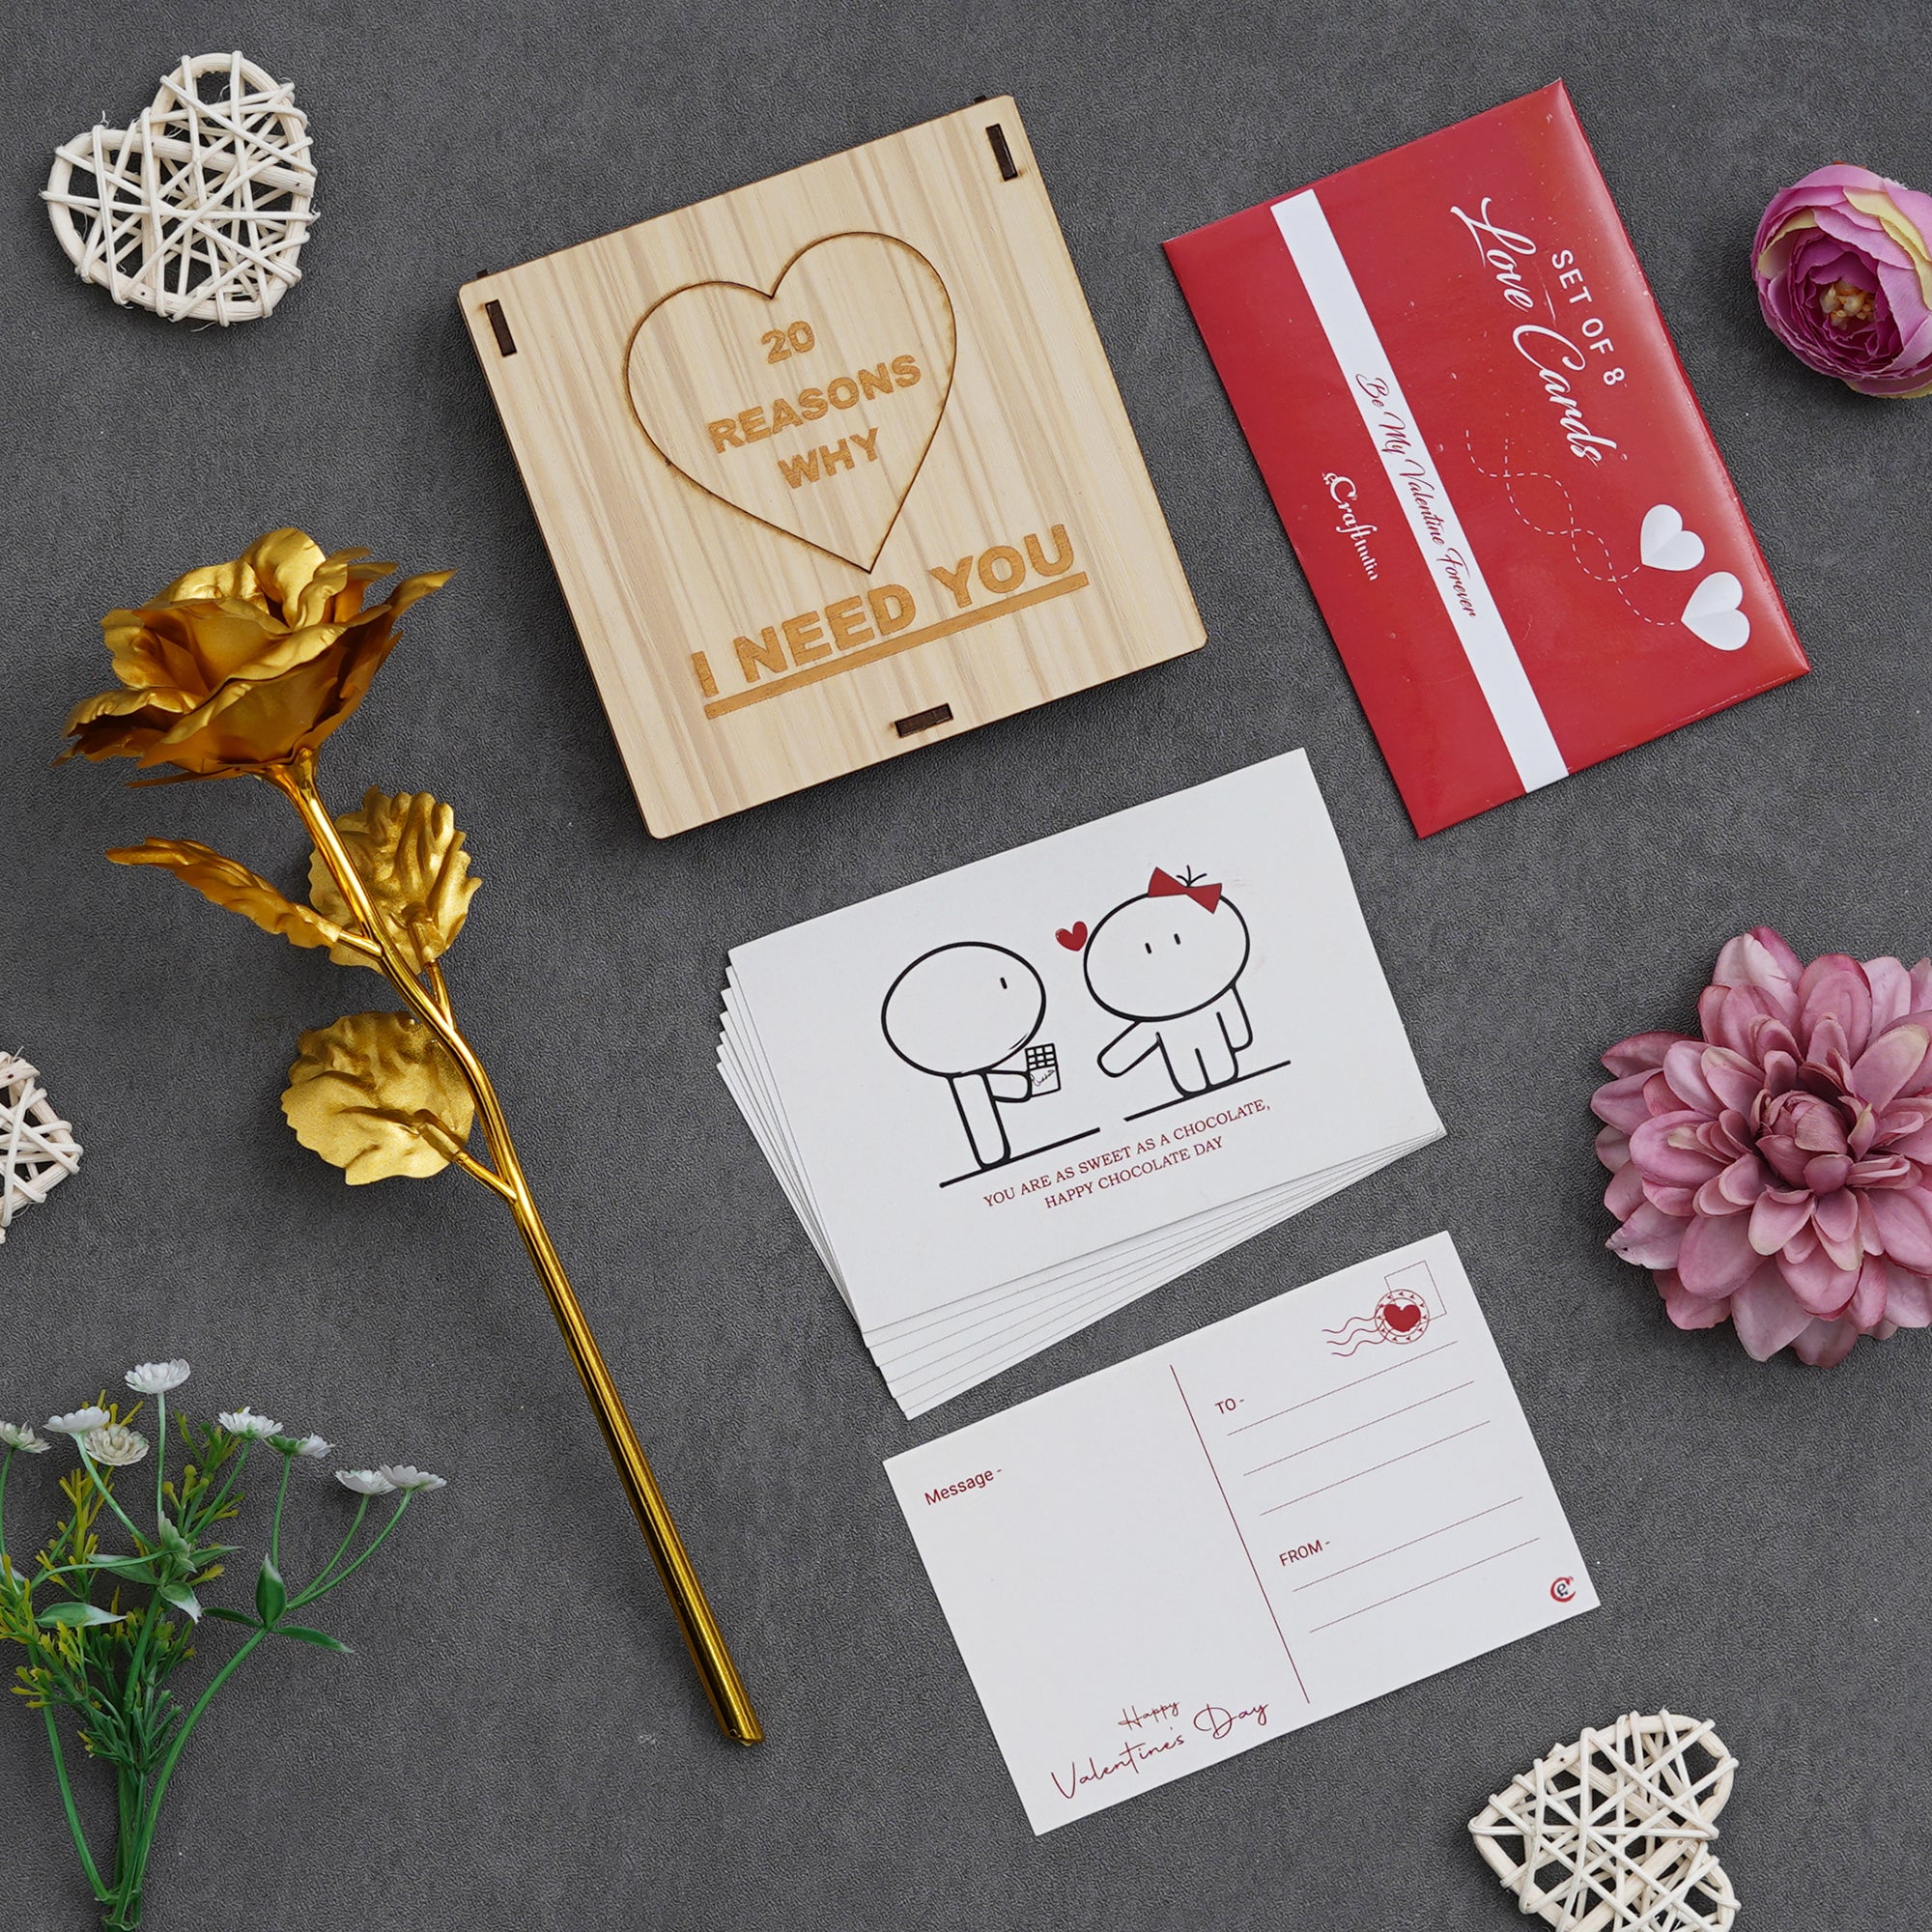 Valentine Combo of Set of 8 Love Post Cards Gift Cards Set, Red Gift Box with Teddy & Roses, "20 Reasons Why I Need You" Printed on Little Hearts Wooden Gift Set